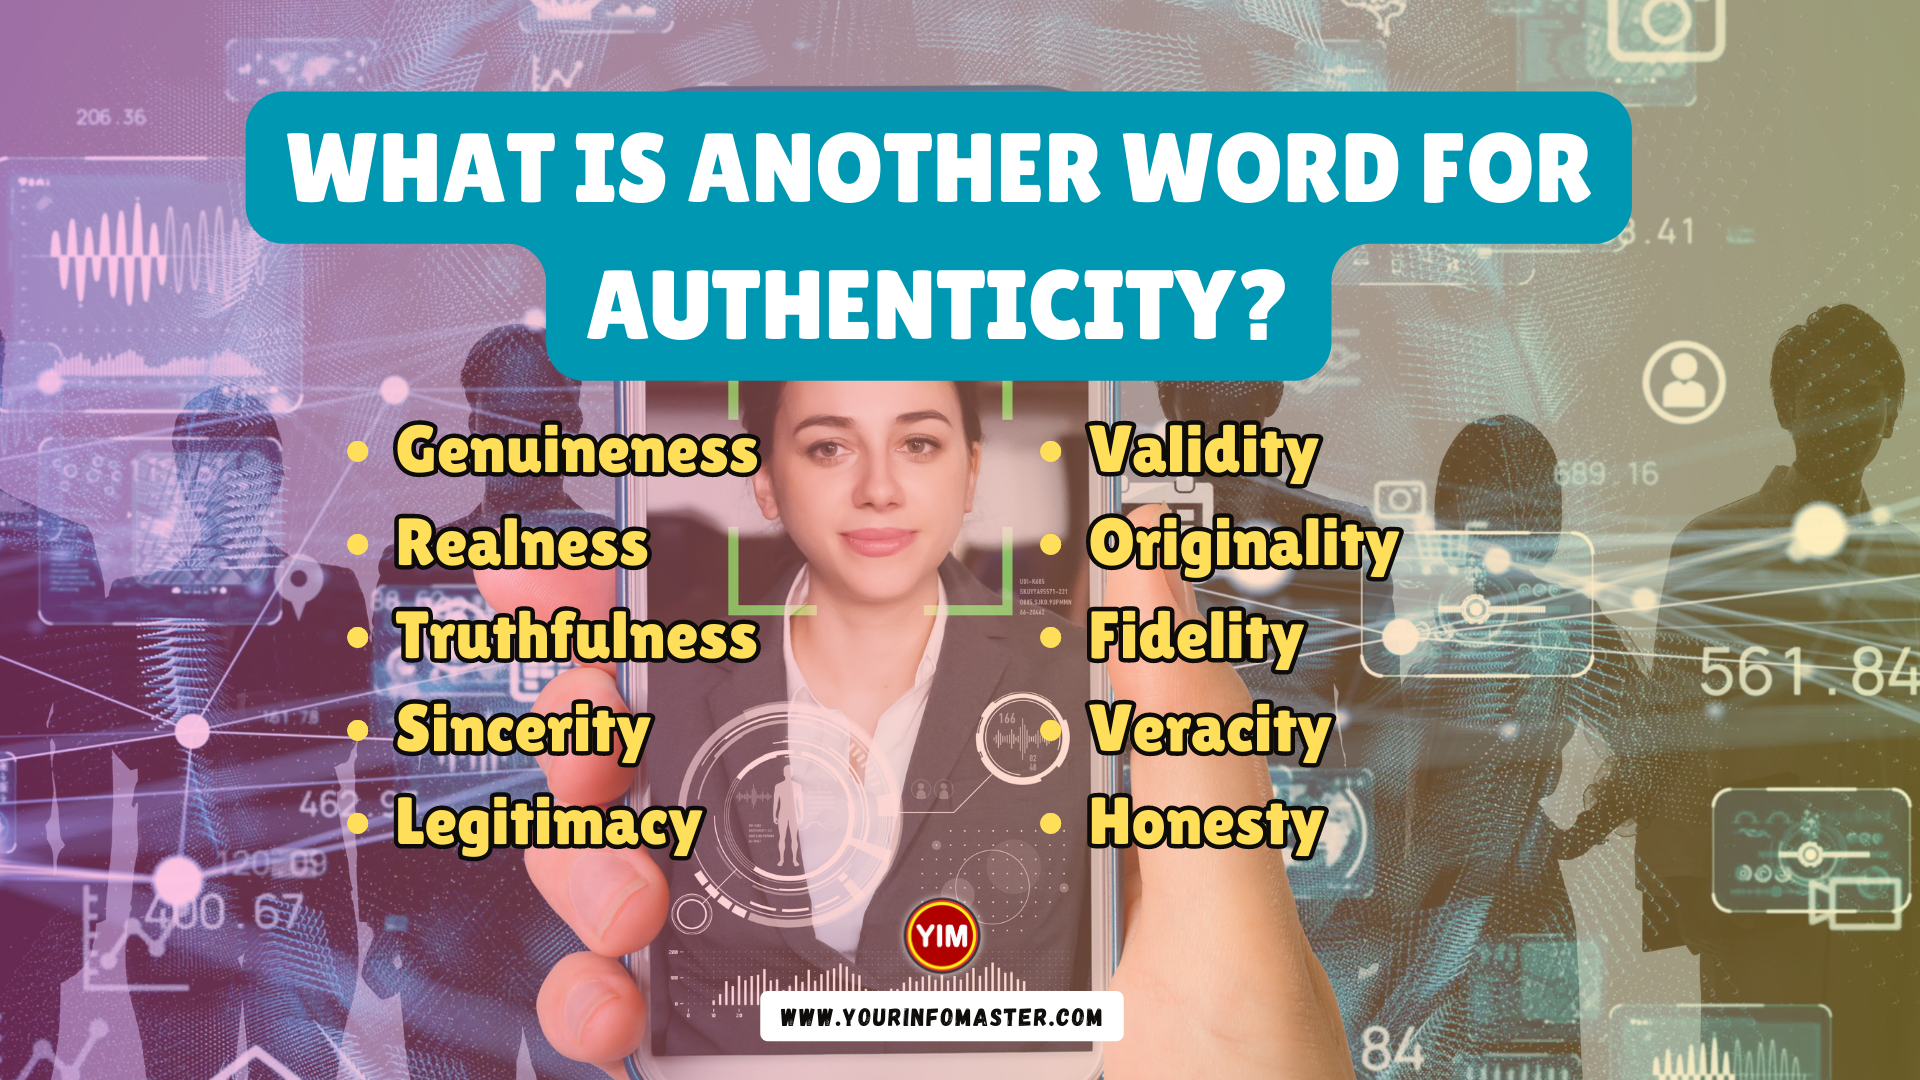 What is another word for Authenticity